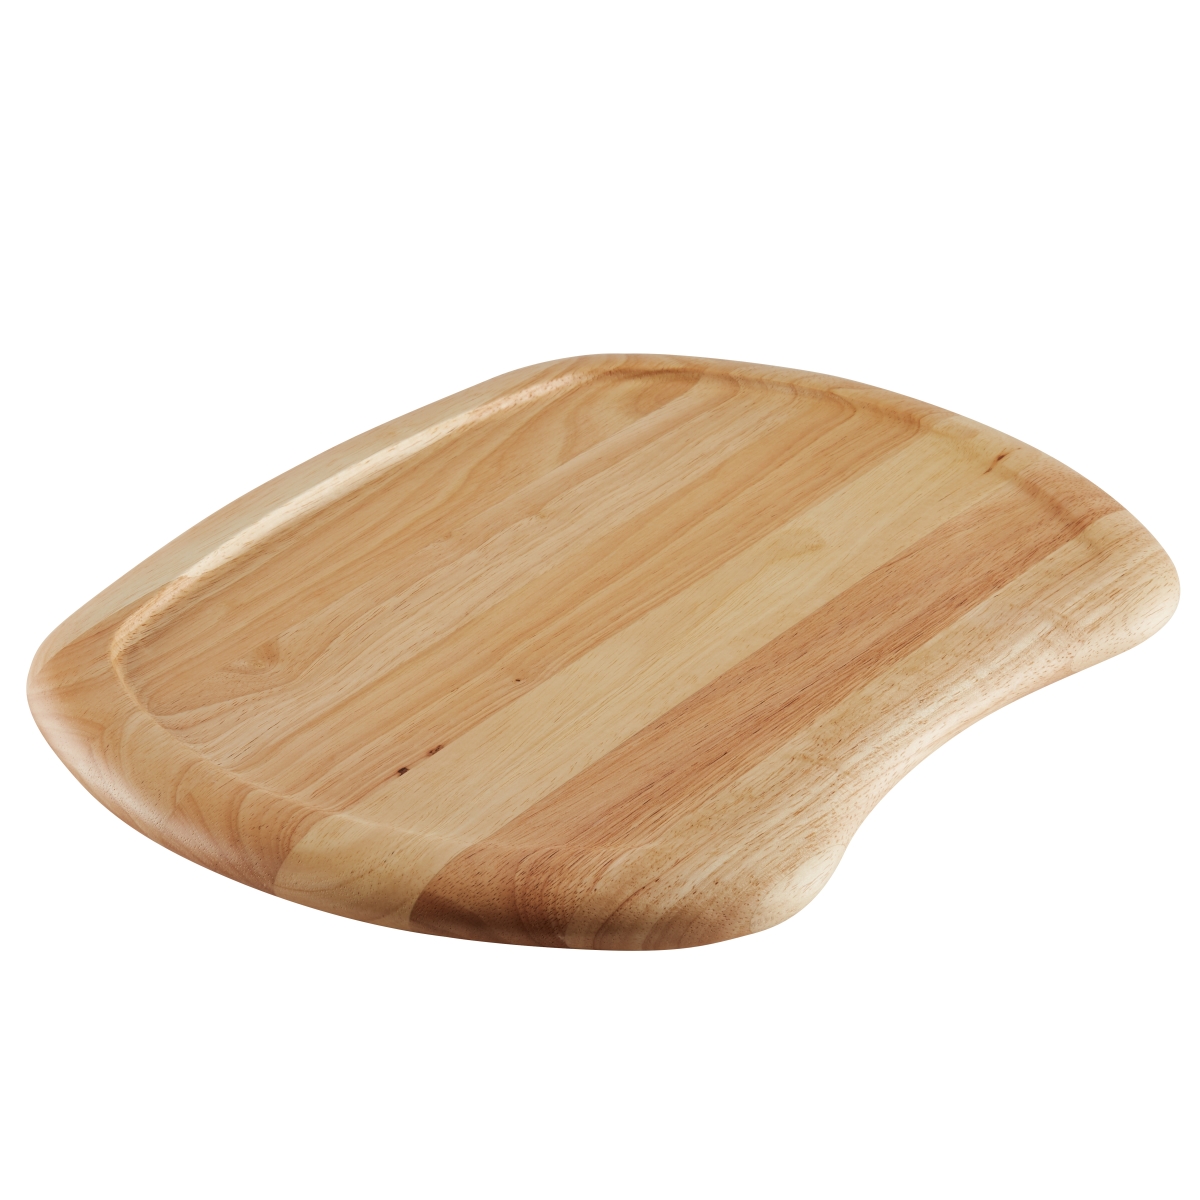 47008 Parawood Cut & Serve Board, 16 X 12 X 1 In.